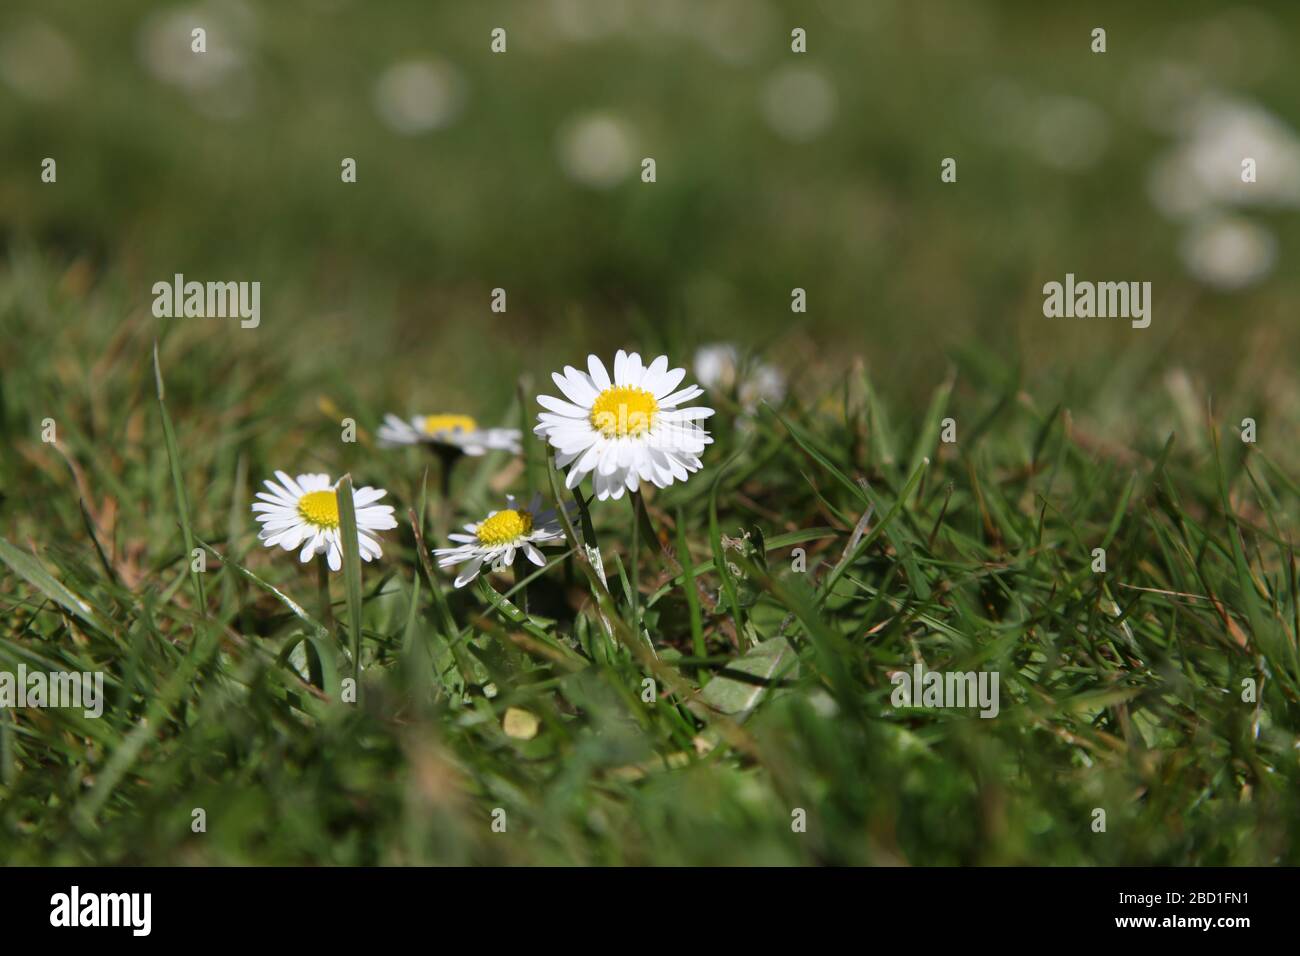 Myriad of English daisy flowers (Bellis perennis L.) growing on the lawn in a UK garden, Spring 2020 Stock Photo